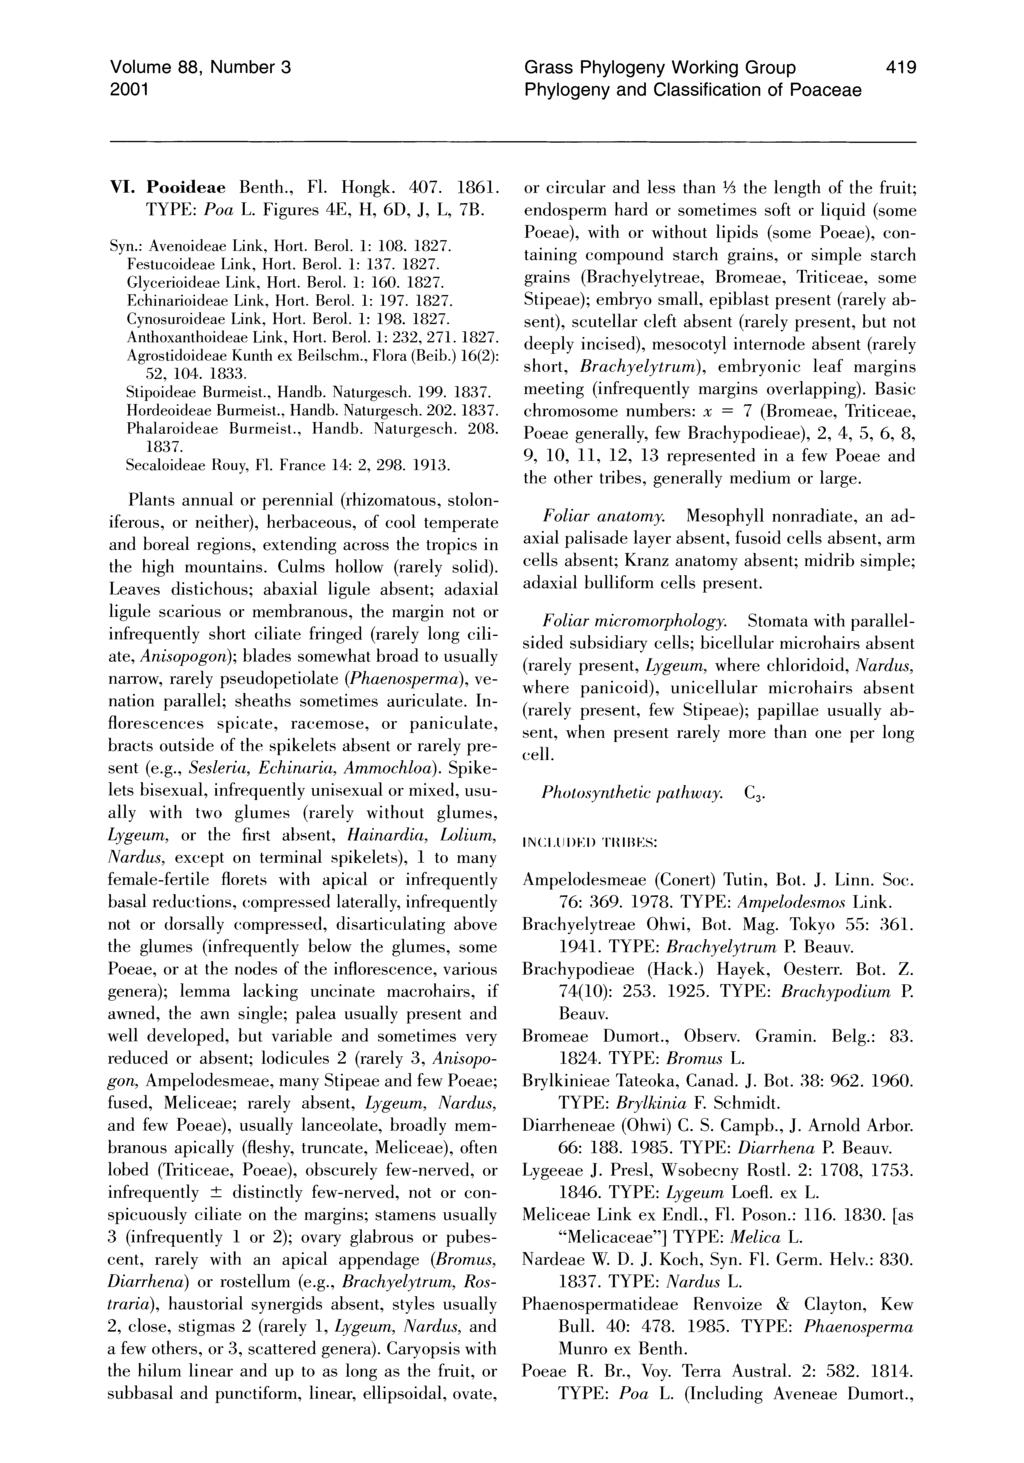 Volume 88, Number 3 2001 Grass Phylogeny Working Group Phylogeny and Classification of Poaceae 419 VI. Pooideae Benth., Fl. Hongk. 407. 1861. TYPE: Poa L. Figures 4E, H, 6D, J, L, 7B. Syn.